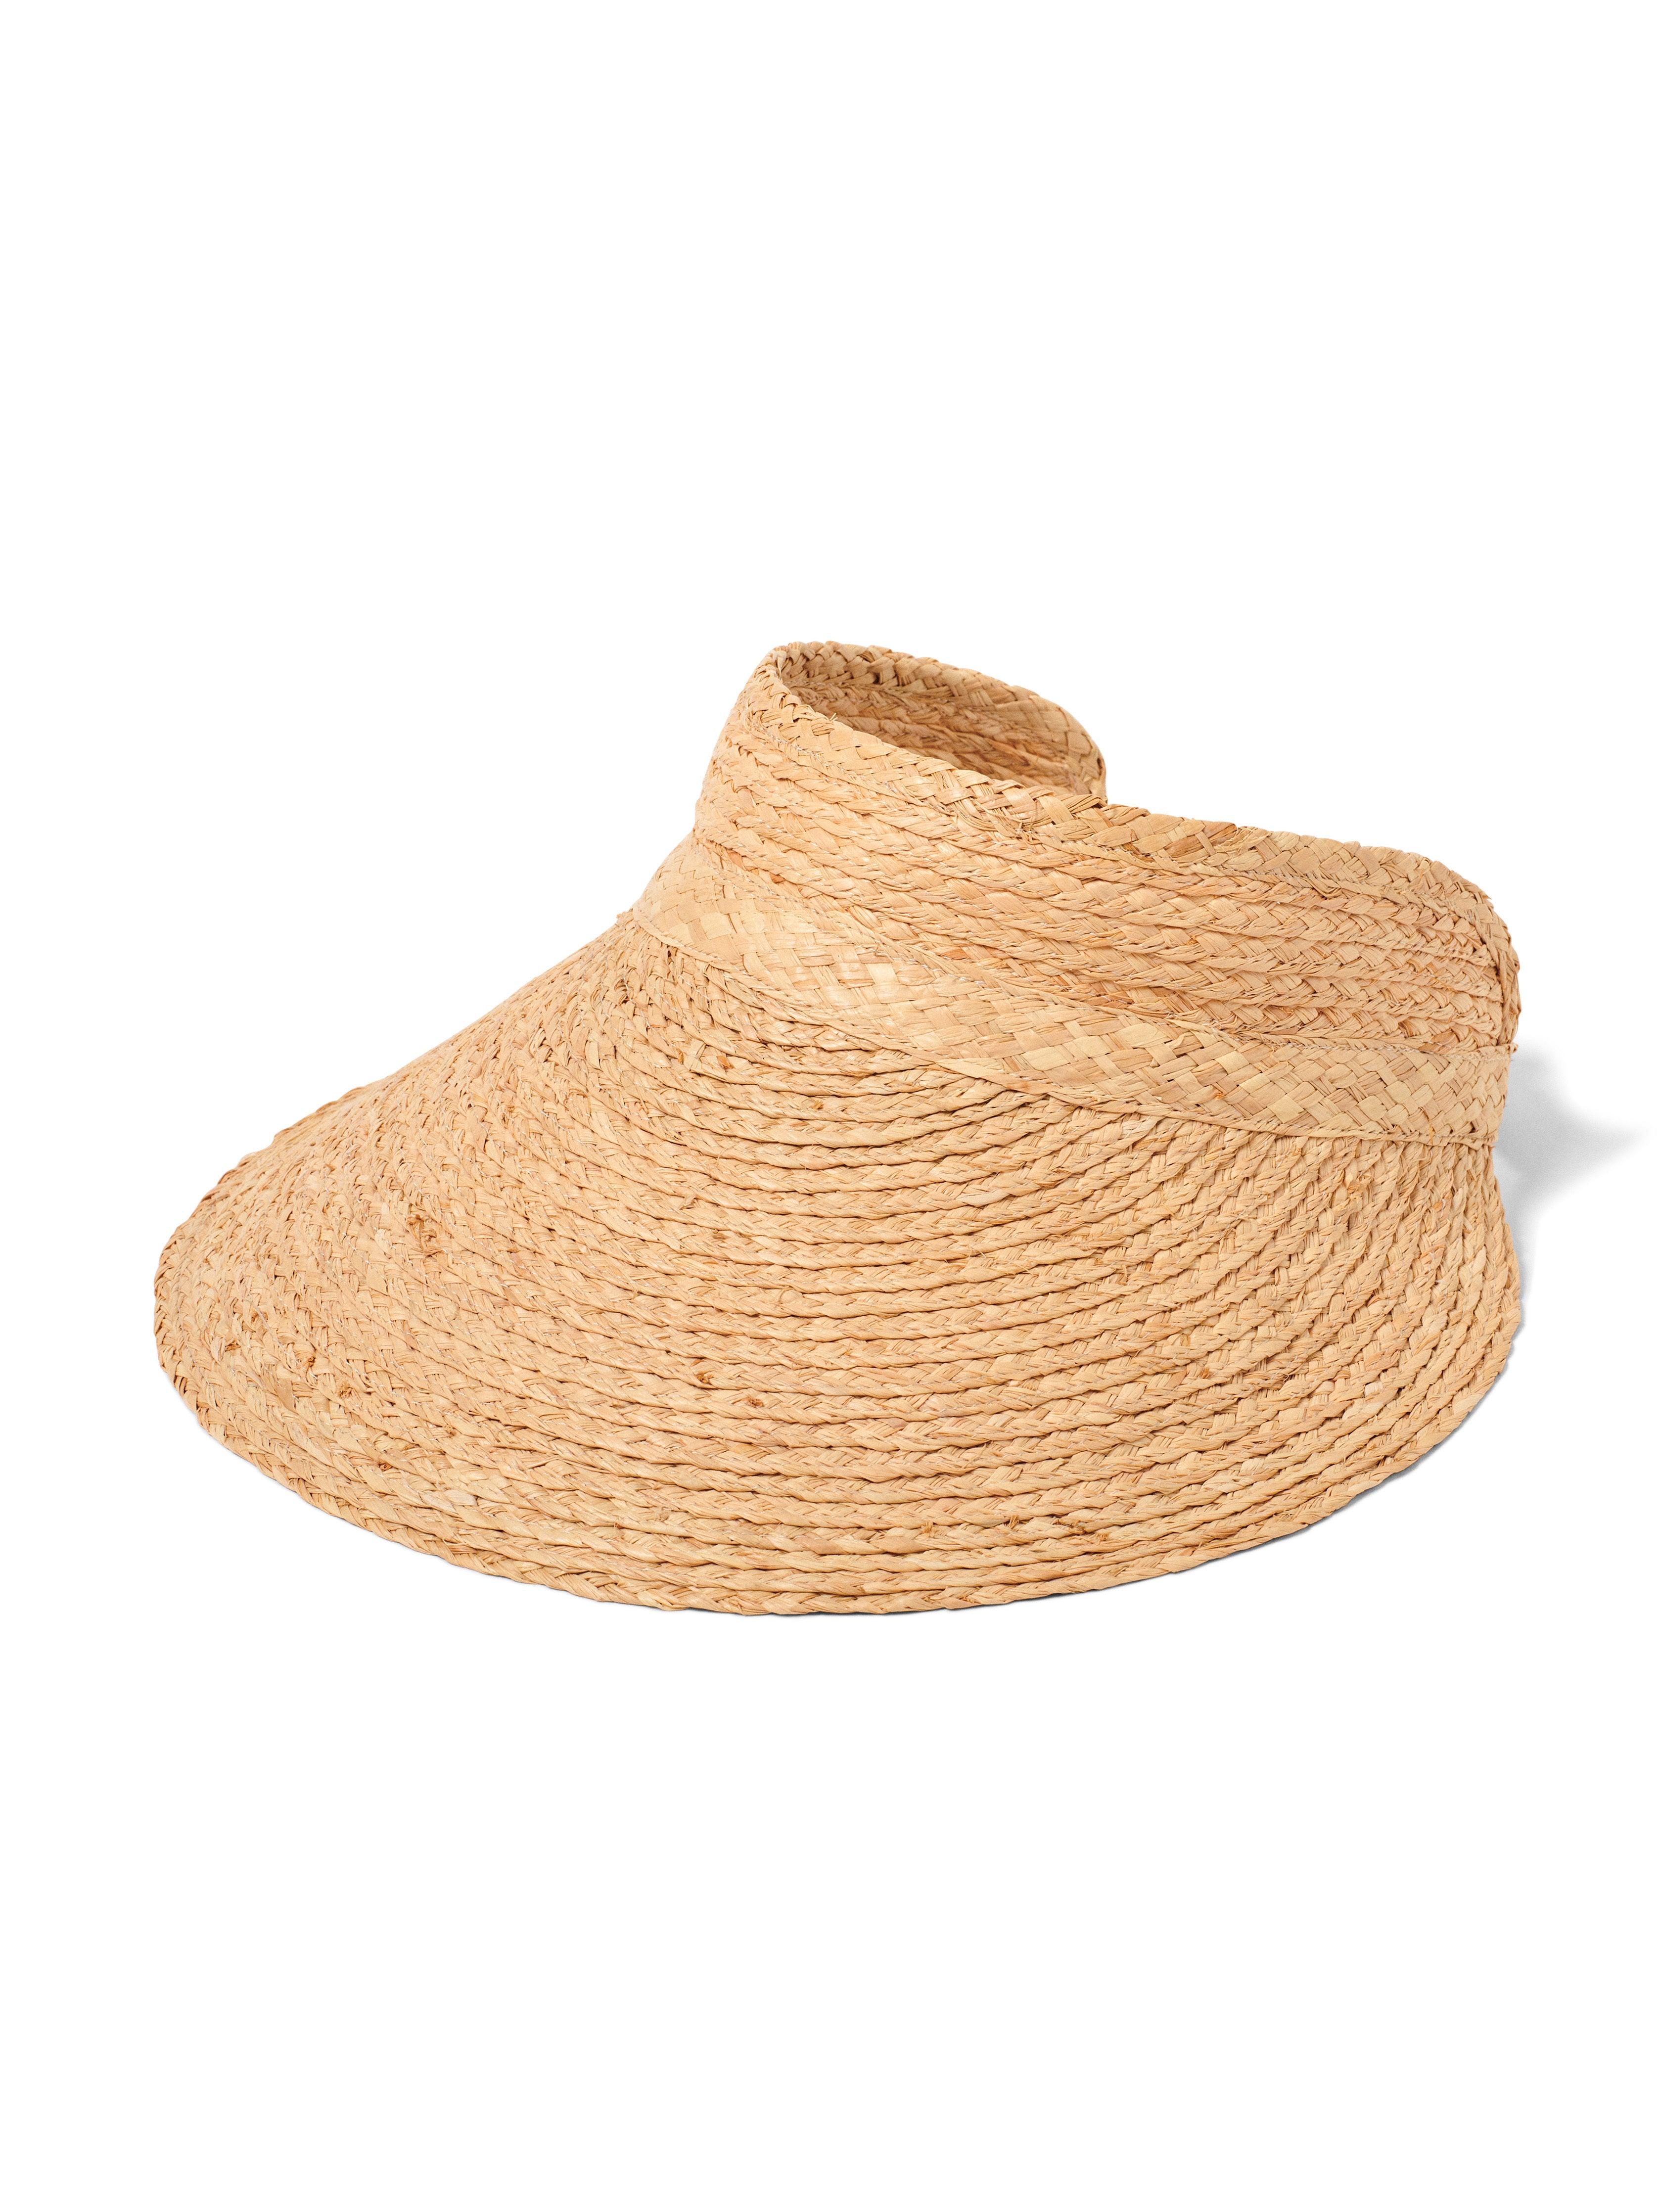 Faherty Packable Wide-brimmed Straw Visor Hat in Natural | Lyst UK